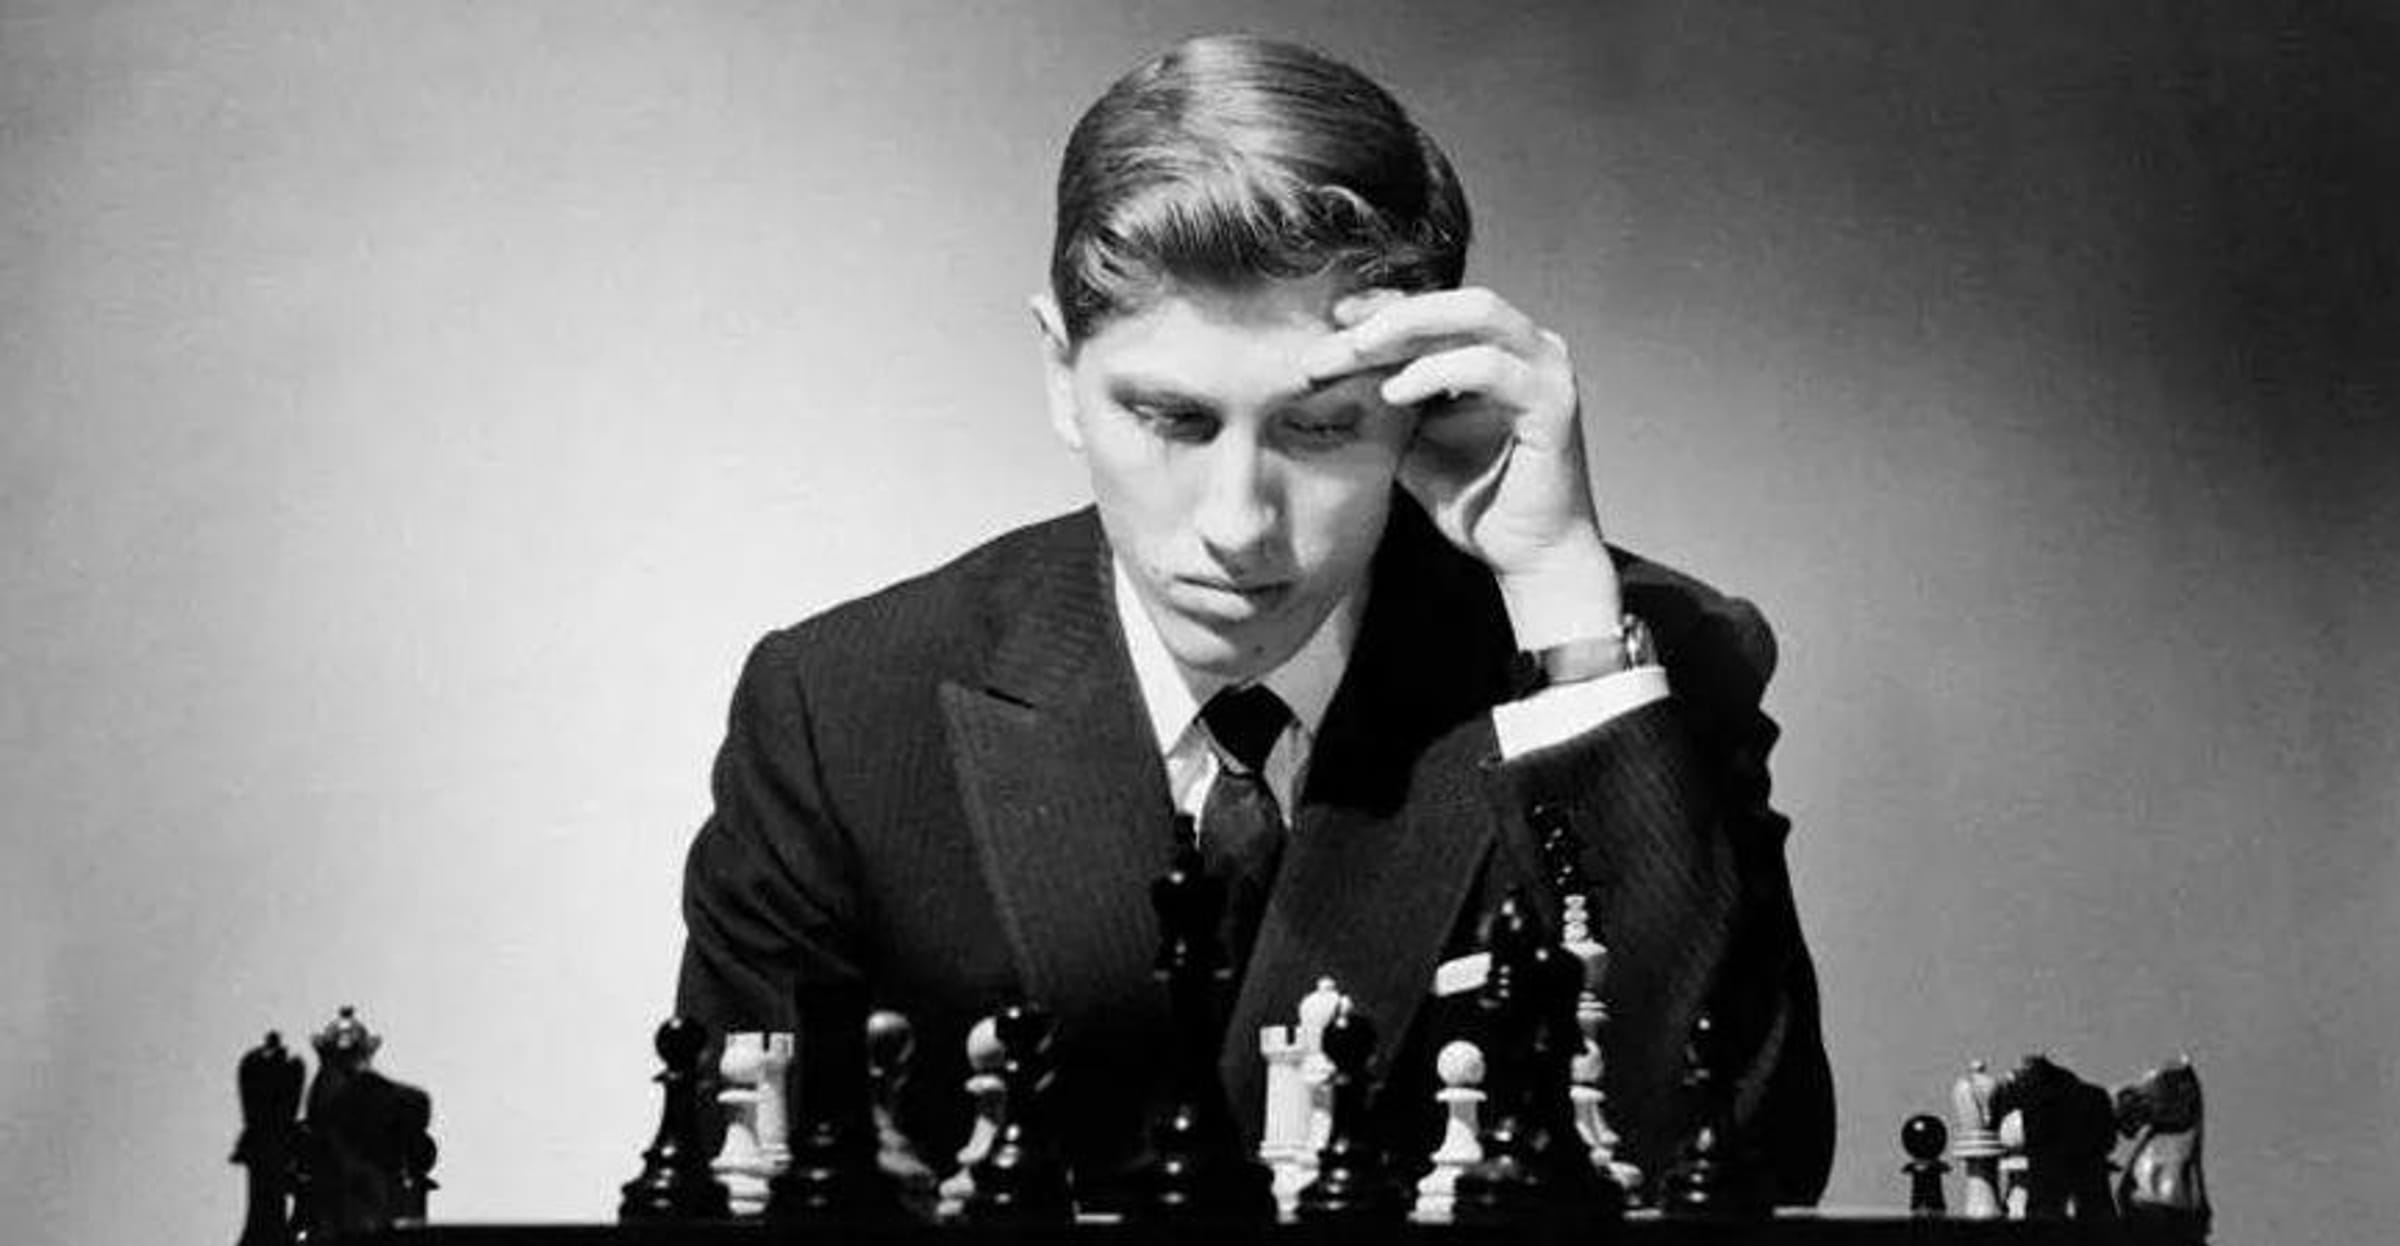 First American since Bobby Fischer to play for title of chess champion –  New York Daily News